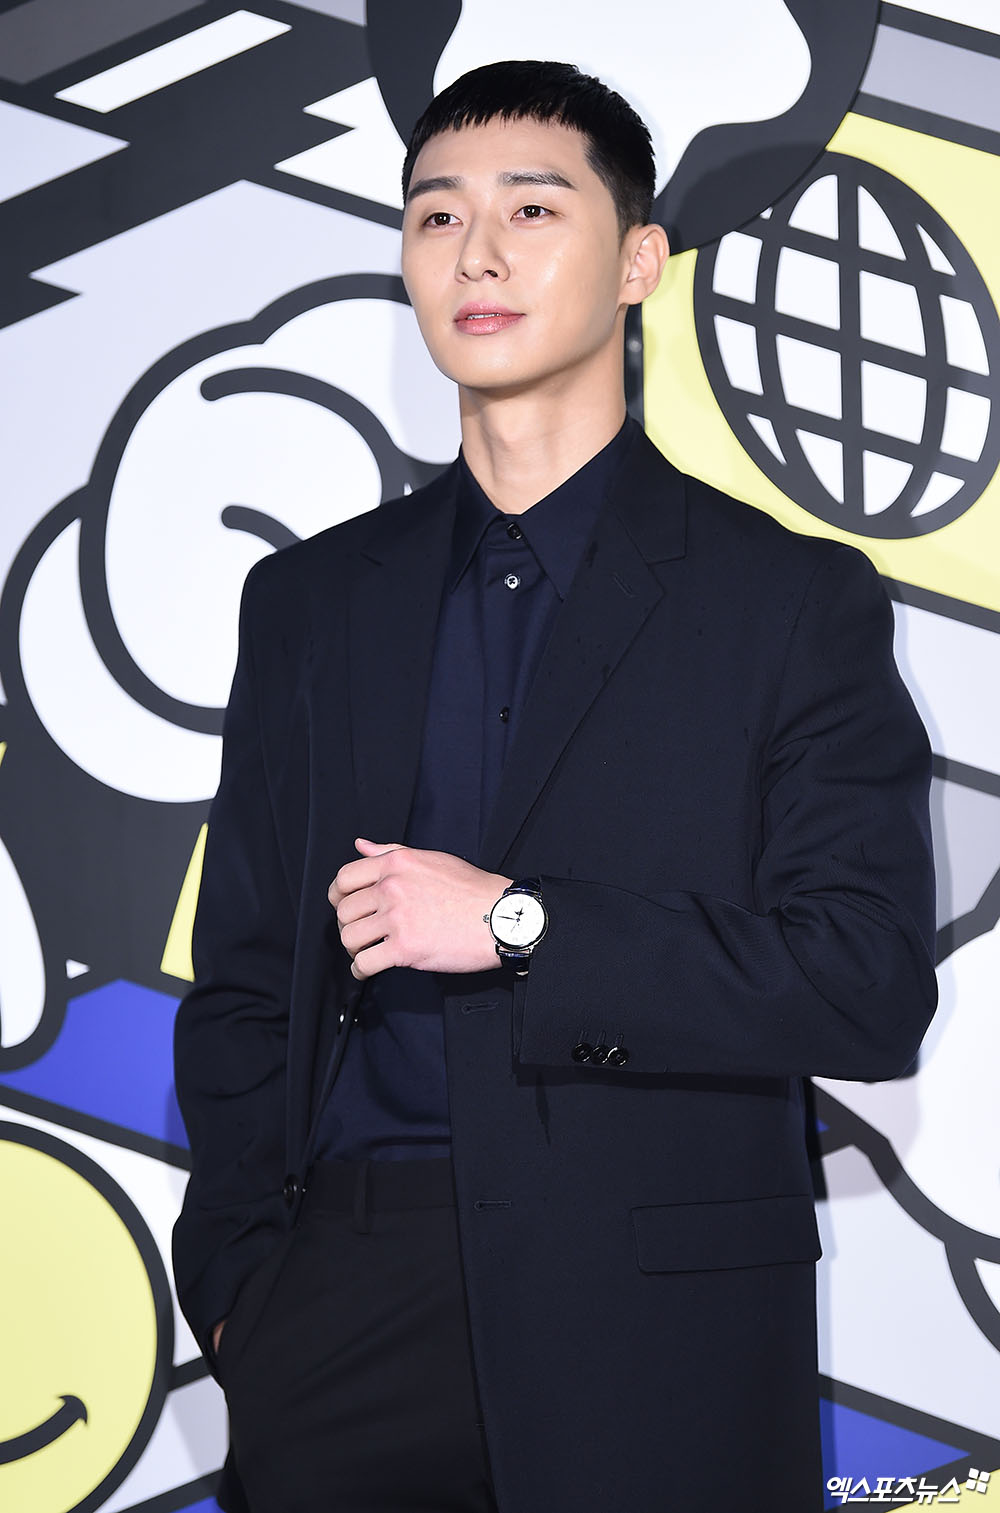 Park Seo-joons agency said it had received The complaint about the flammer.Actor Park Seo-joon agency Awesome Eanti said on August 28, We have been constantly monitoring malicious posts for our actor Park Seo-joon. We have decided that the act of disseminating and reproducing the contents that are not true indiscriminately and disregarding the honor of Park Seo-joon has reached a level that is no longer acceptable. Based on the evidence that has been made, I appointed a legal representative last week and received The complaint at Seoul Seongdong Police Station. We will not only respond to one-off measures, but will also take all legal measures including additional accusations if malicious slander, sexual harassment, and false facts are confirmed through regular monitoring, and we will continue to monitor and respond to all kinds of complaints without any agreement.Finally, the agency said, We will also take legal action against malicious post writers for actors other than Park Seo-joon, and we will continue to make efforts to protect the personality and rights of our actors.Meanwhile, Park Seo-joon will appear on JTBCs new gilt drama Itae One Clath, which is scheduled to be broadcast on the 31st.The following is a statement from Park Seo-joon.Hi, this is Awesome.We have been monitoring malicious posts for our Actor Park Seo-joon.Recently, it was judged that the act of disseminating the contents of the facts that are not true indiscriminately distributed and expanded and reproduced, and the honor of Park Seo-joon was no longer tolerated. Based on the evidence collected for many years, last week, a legal representative was appointed and the company received the complaint to the Seoul Seongdong Police Station.The act of insulting Park Seo-joon by exploiting anonymity has hurt not only the party Lion but also the family.We will not only respond to one-off measures, but also will continue to monitor all legal actions, including additional complaints, if malicious slander, sexual harassment, and false facts are confirmed against Park Seo-joon through regular monitoring.Awesome E & T will also take legal action against malicious postwriters for actors other than Park Seo-joon, and will continue to make efforts to protect the personality and rights of their actors.Thank you.Photo = DB